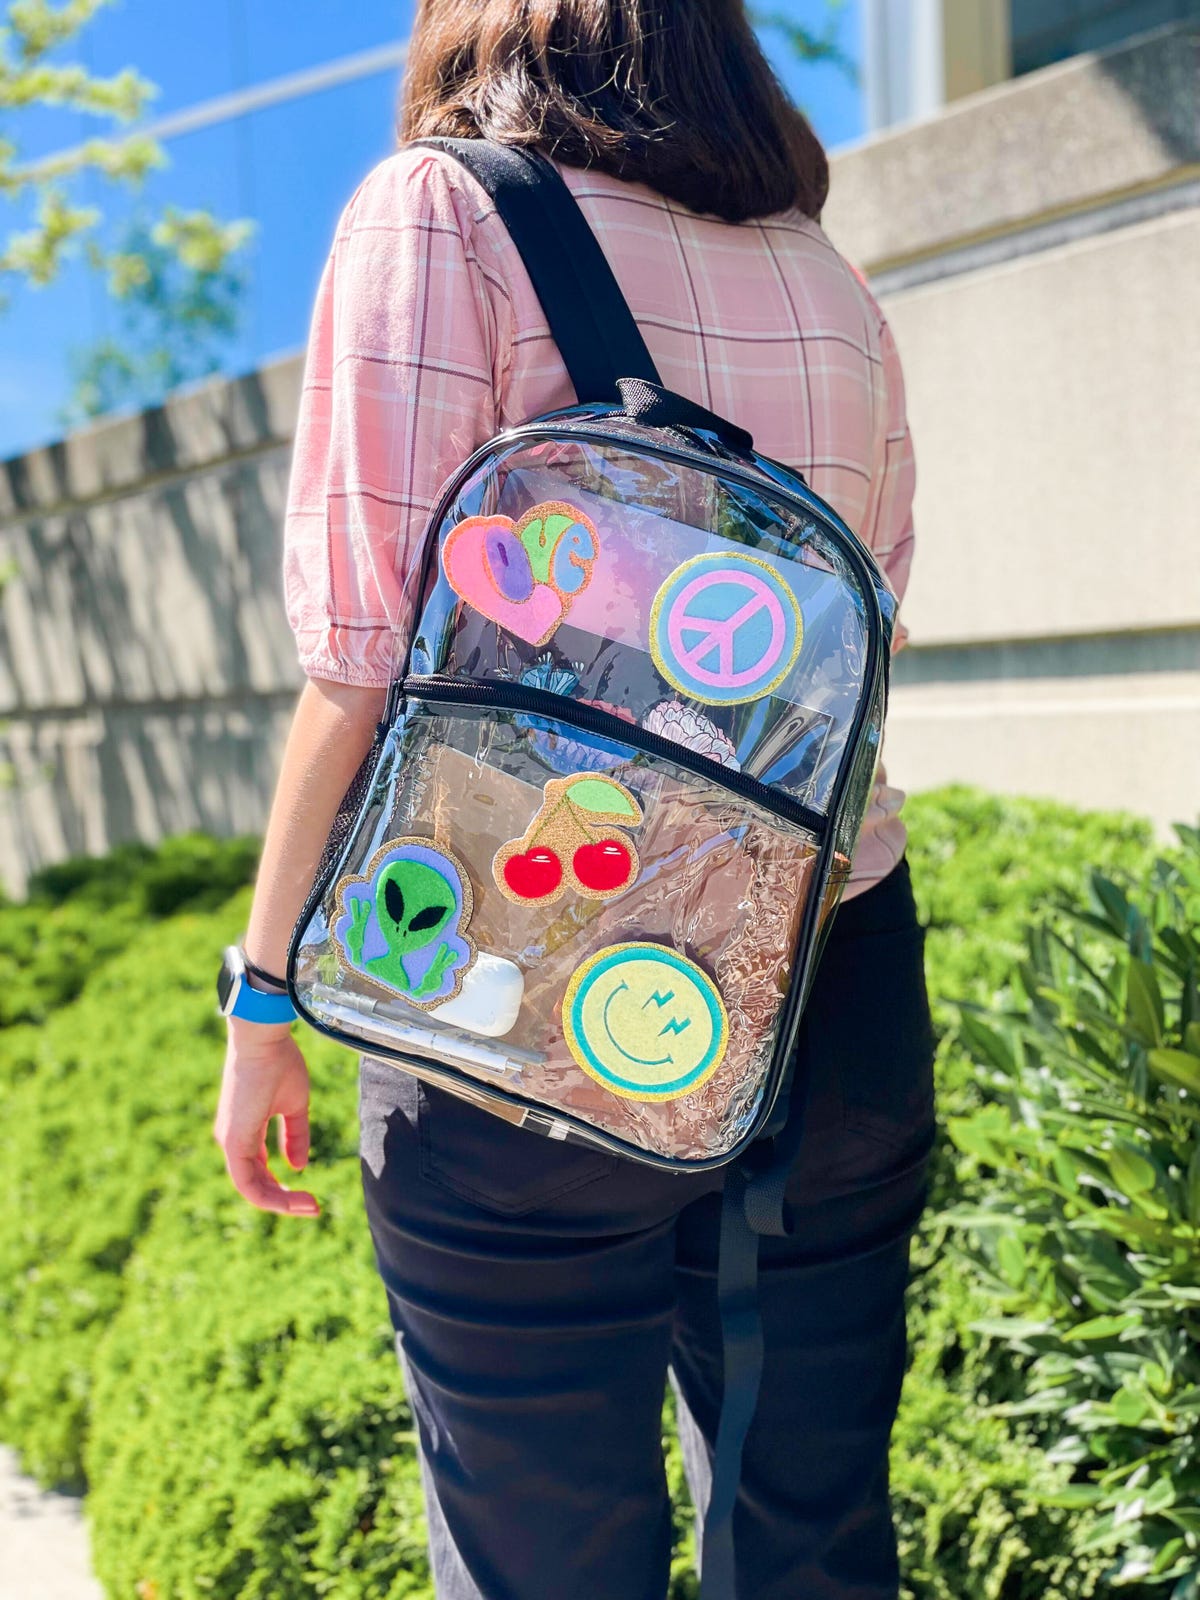 DIY Patch Covered Purses! Keeping My #Patchgame Strong! - Brite